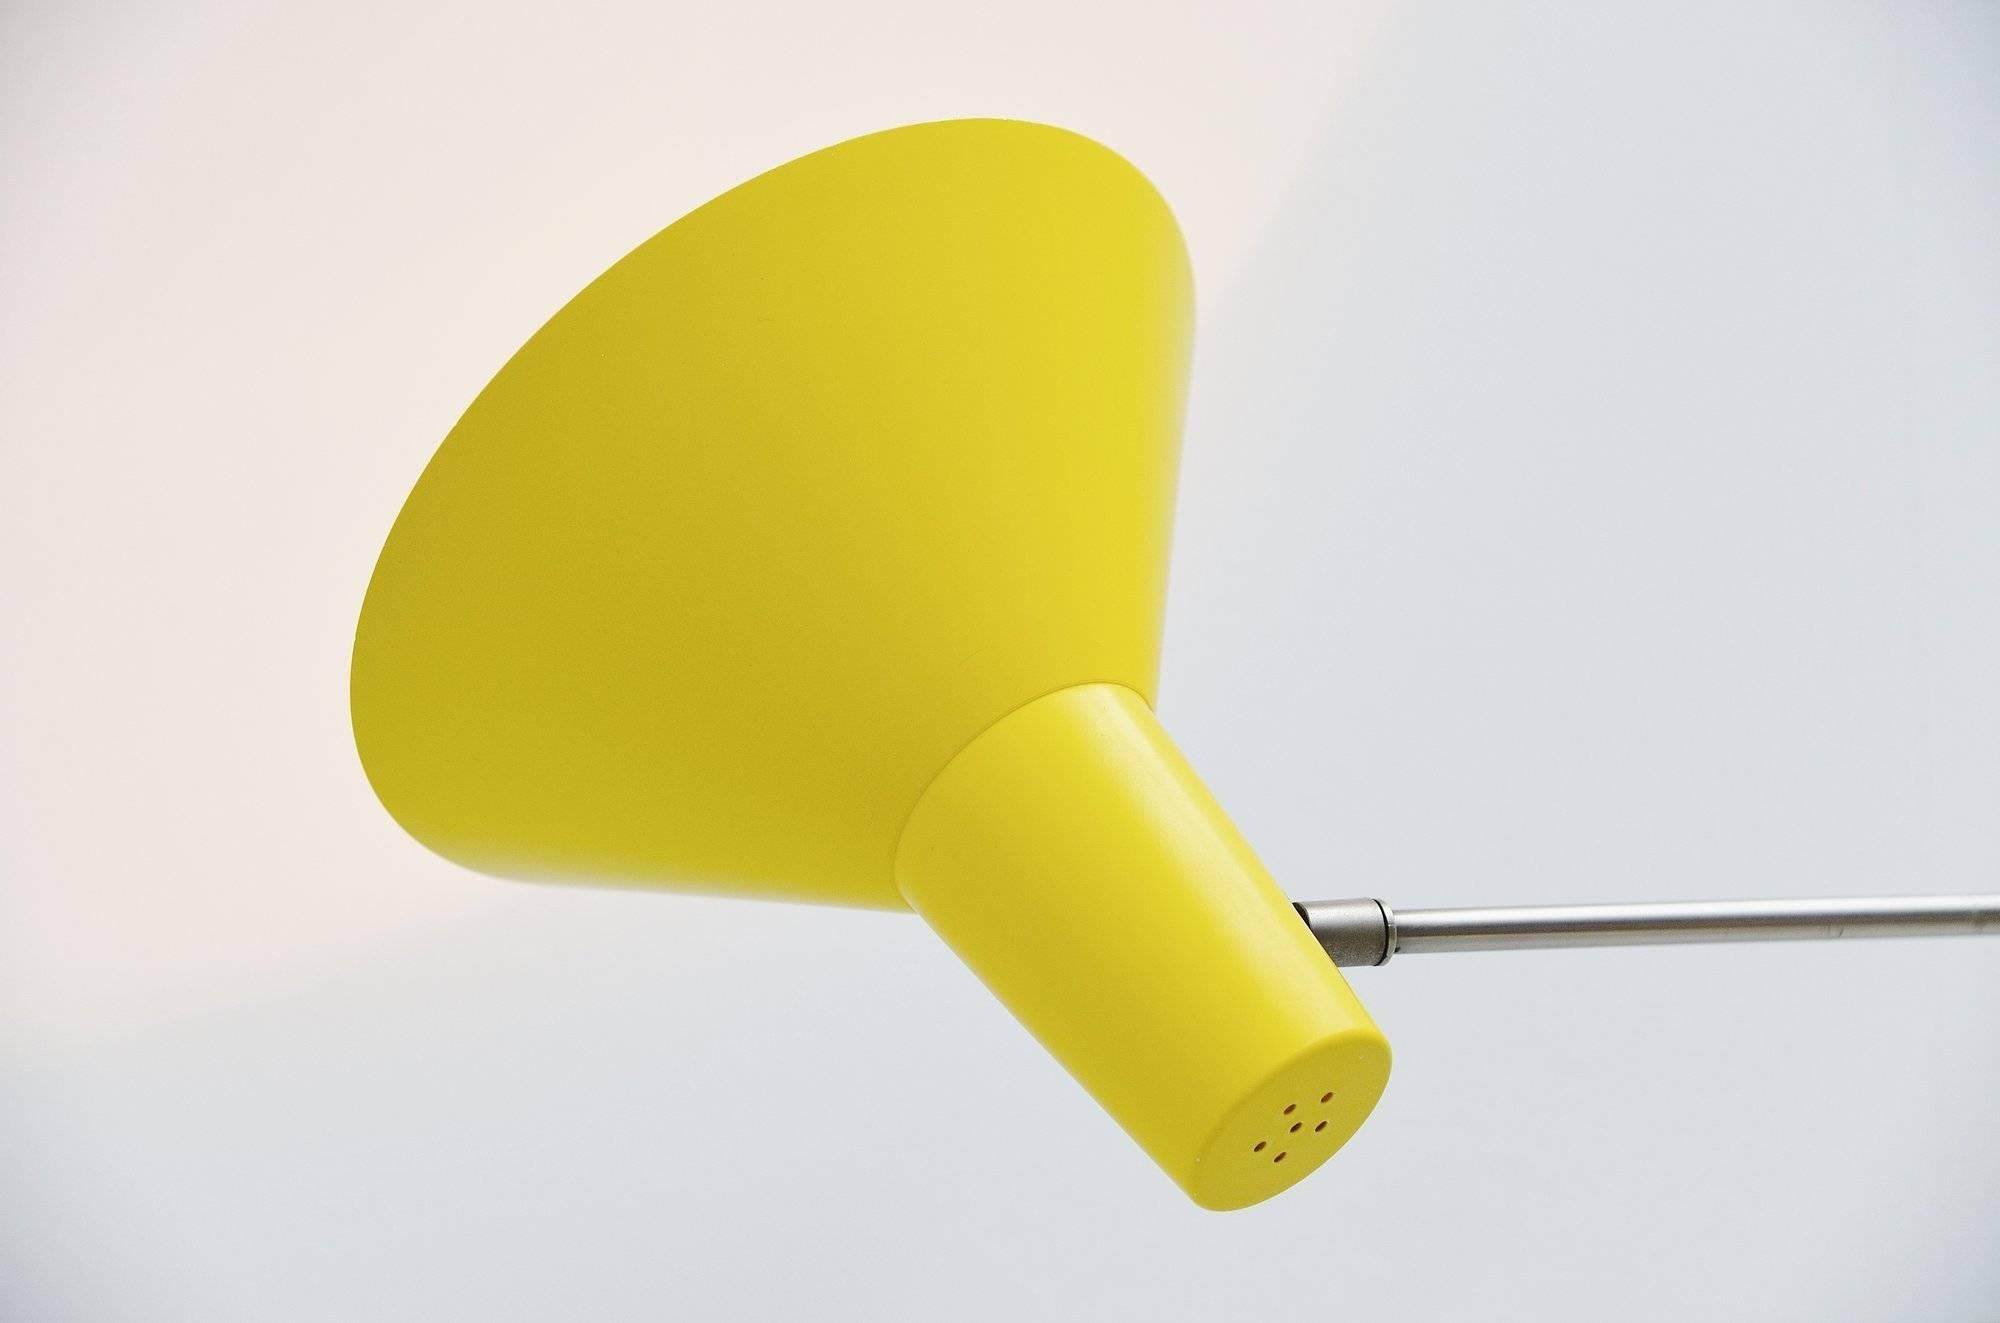 Nice adjustable wall lamp designed by Floris Fiedeldij and manufactured by Aritmeta Soest, Holland, 1960. This lamp has a nickel plated adjustable arm and bright yellow typical fifties color shade and wall plate. The lamp is in fantastic original